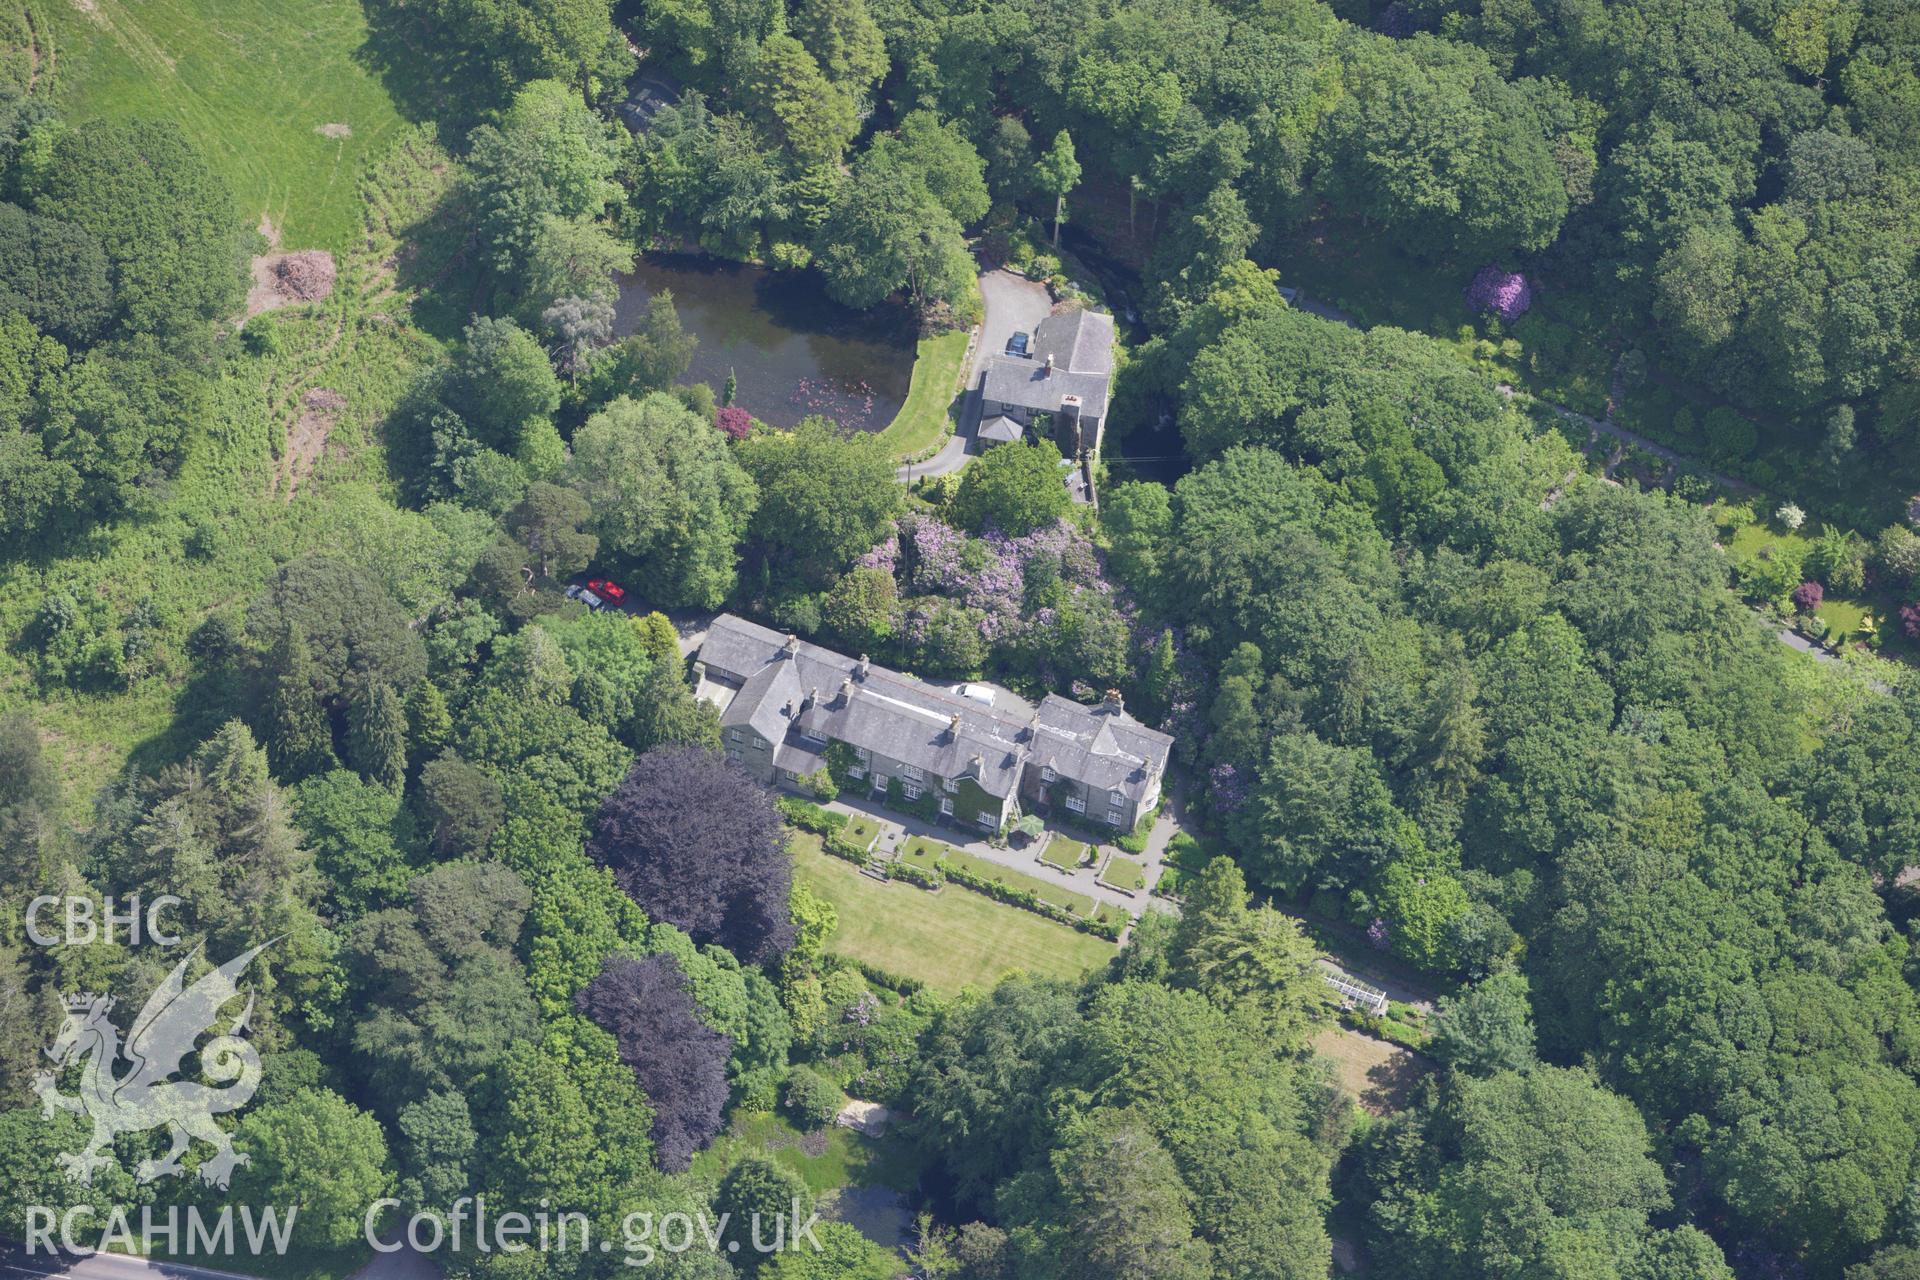 RCAHMW colour oblique aerial photograph of Voelas Hall, Glandyfi. Taken on 02 June 2009 by Toby Driver